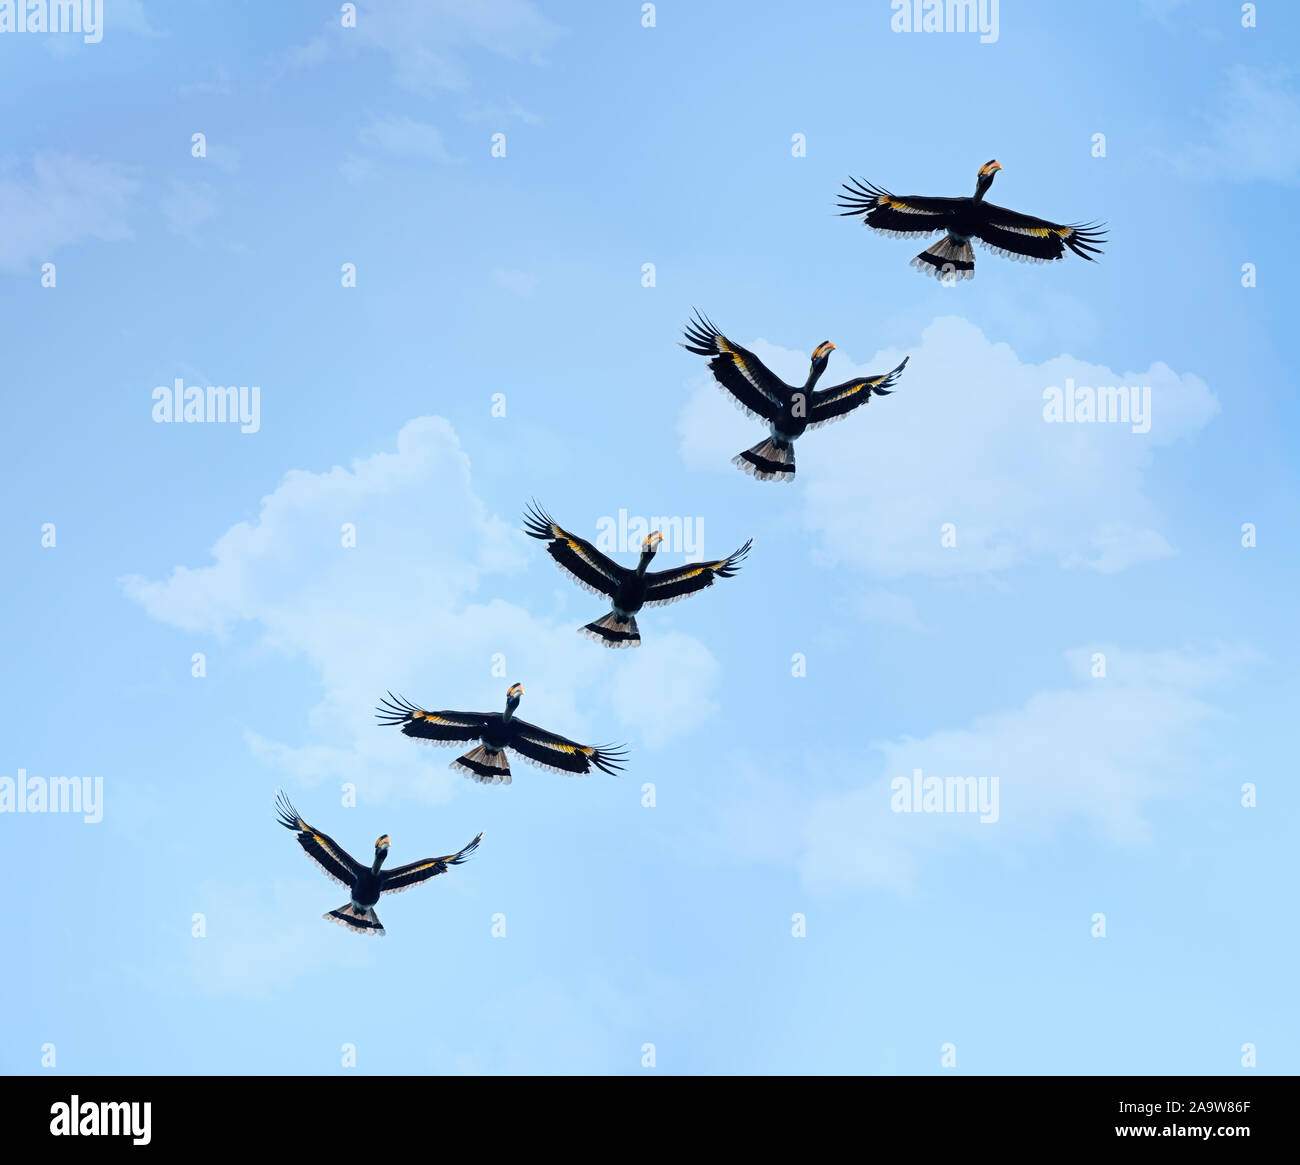 A multi-exposure image showing the flight of a great hornbill (Buceros bicornis). Stock Photo